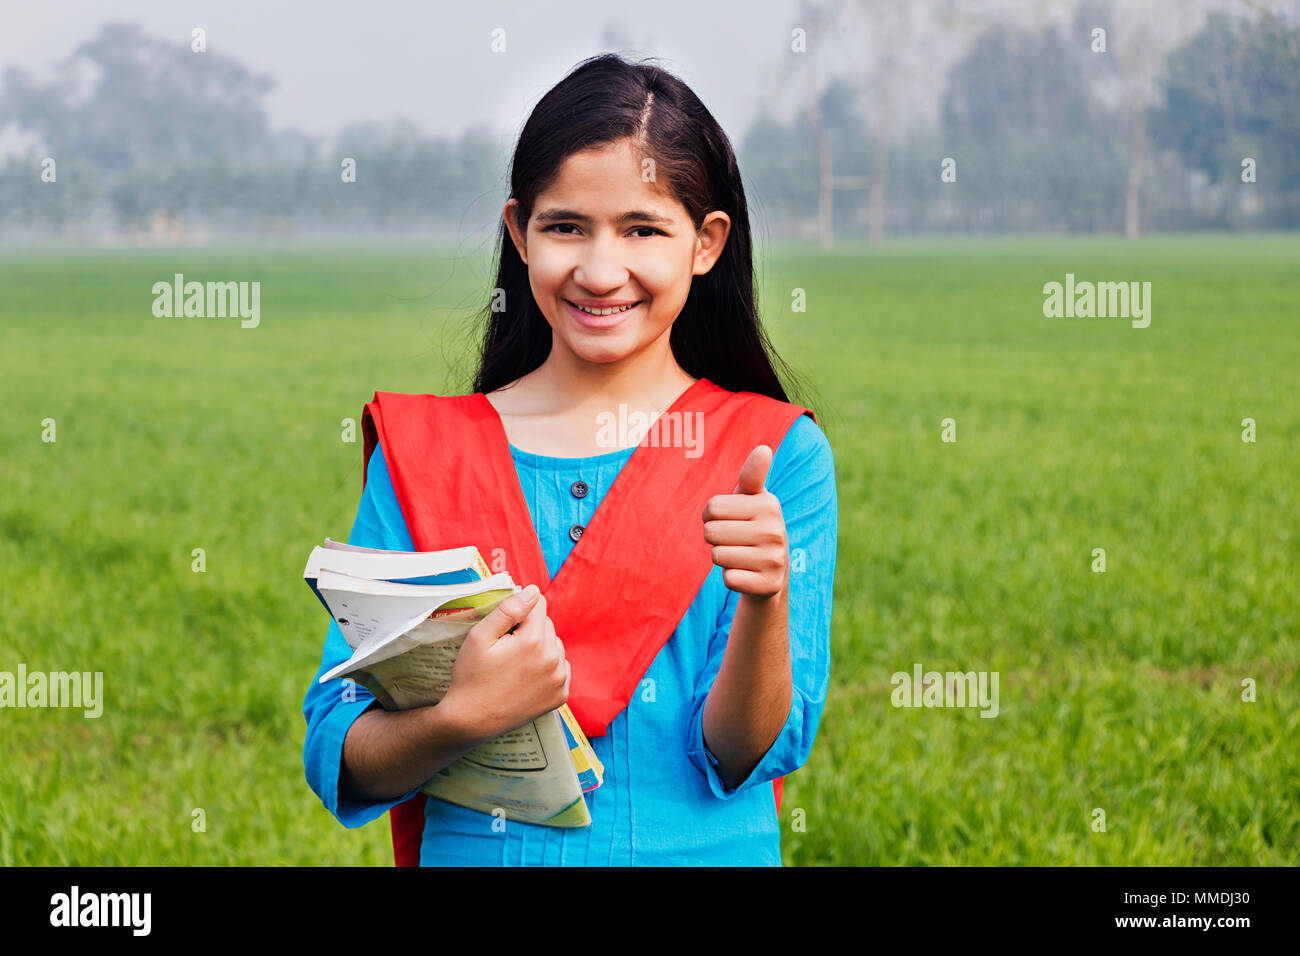 One Villager Girl College Student Showing Thumbs-up With Books Farm Stock Photo